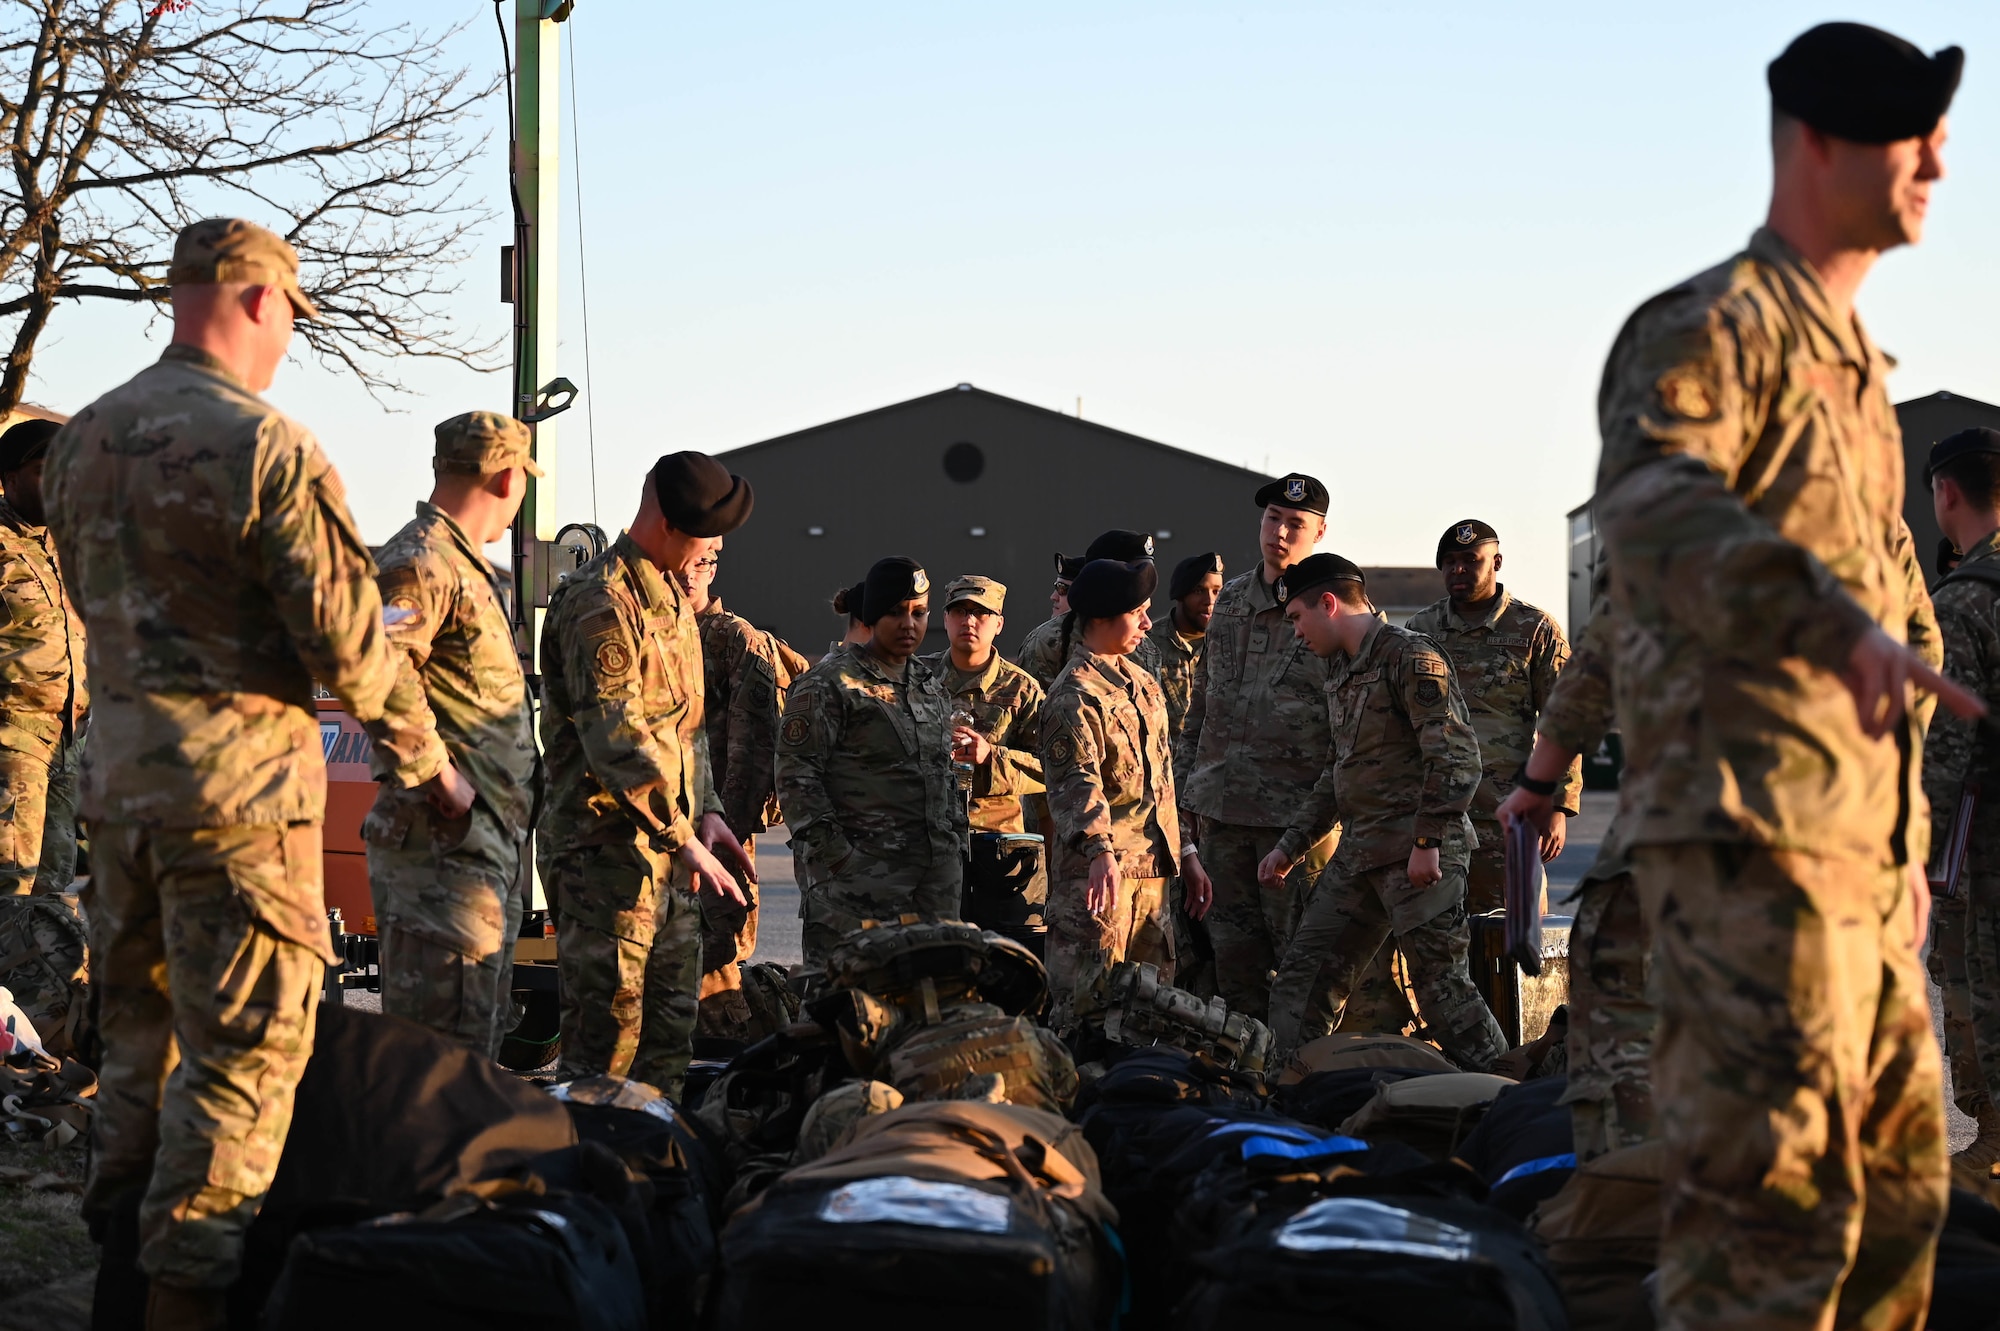 375th Security Forces Squadron Airmen, line up luggage to be palletized during a rapid deployment rehearsal on Scott Air Force Base, Illinois, March 16, 2022. This deployment mobility rehearsal emphasizes readiness of command and control procedures and continuity of operations in a simulated contested environment. (U.S. Air Force photo by Airman 1st Class Mark Sulaica)